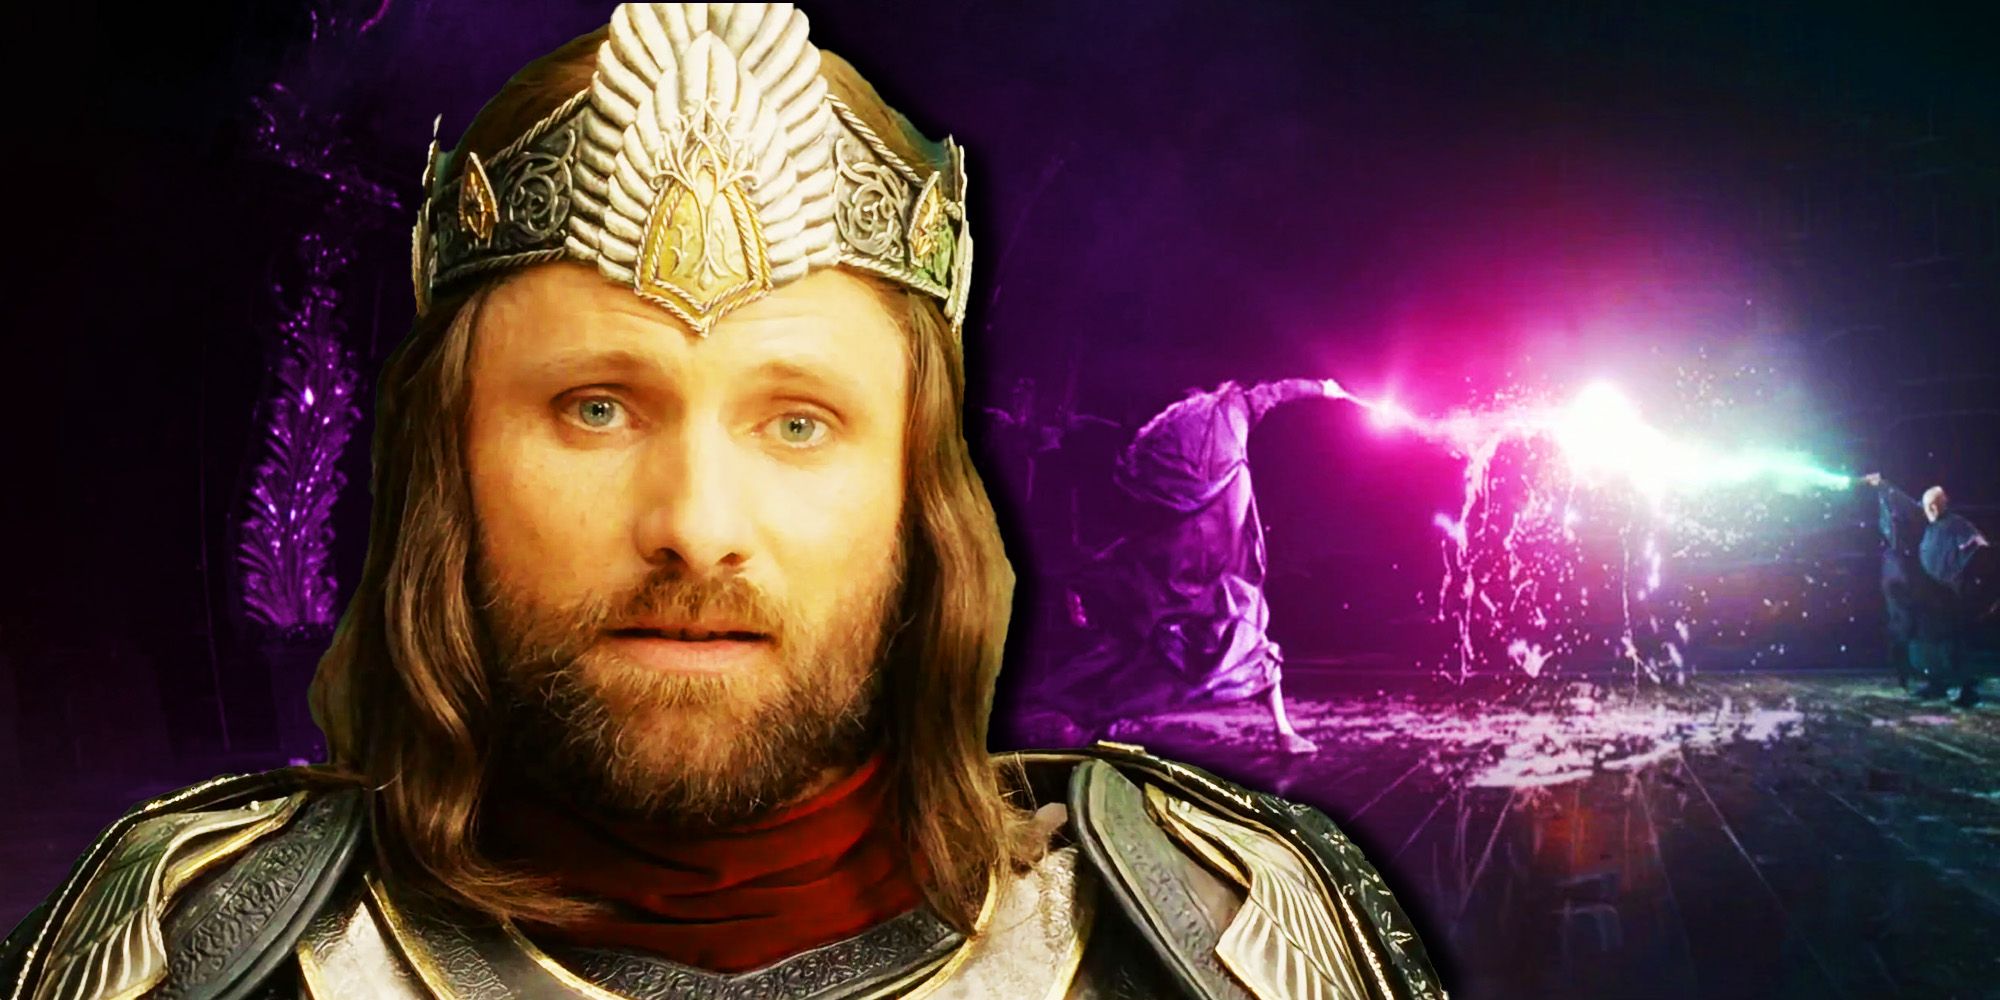 An image of Viggo Mortensen as Aragorn wearing the crown in Lord of the Rings: Return of the King and an image of Michael Gambon and Ralph Fiennes as Dumbledore and Voldemort fighting in Harry Potter and the Order of the Phoenix